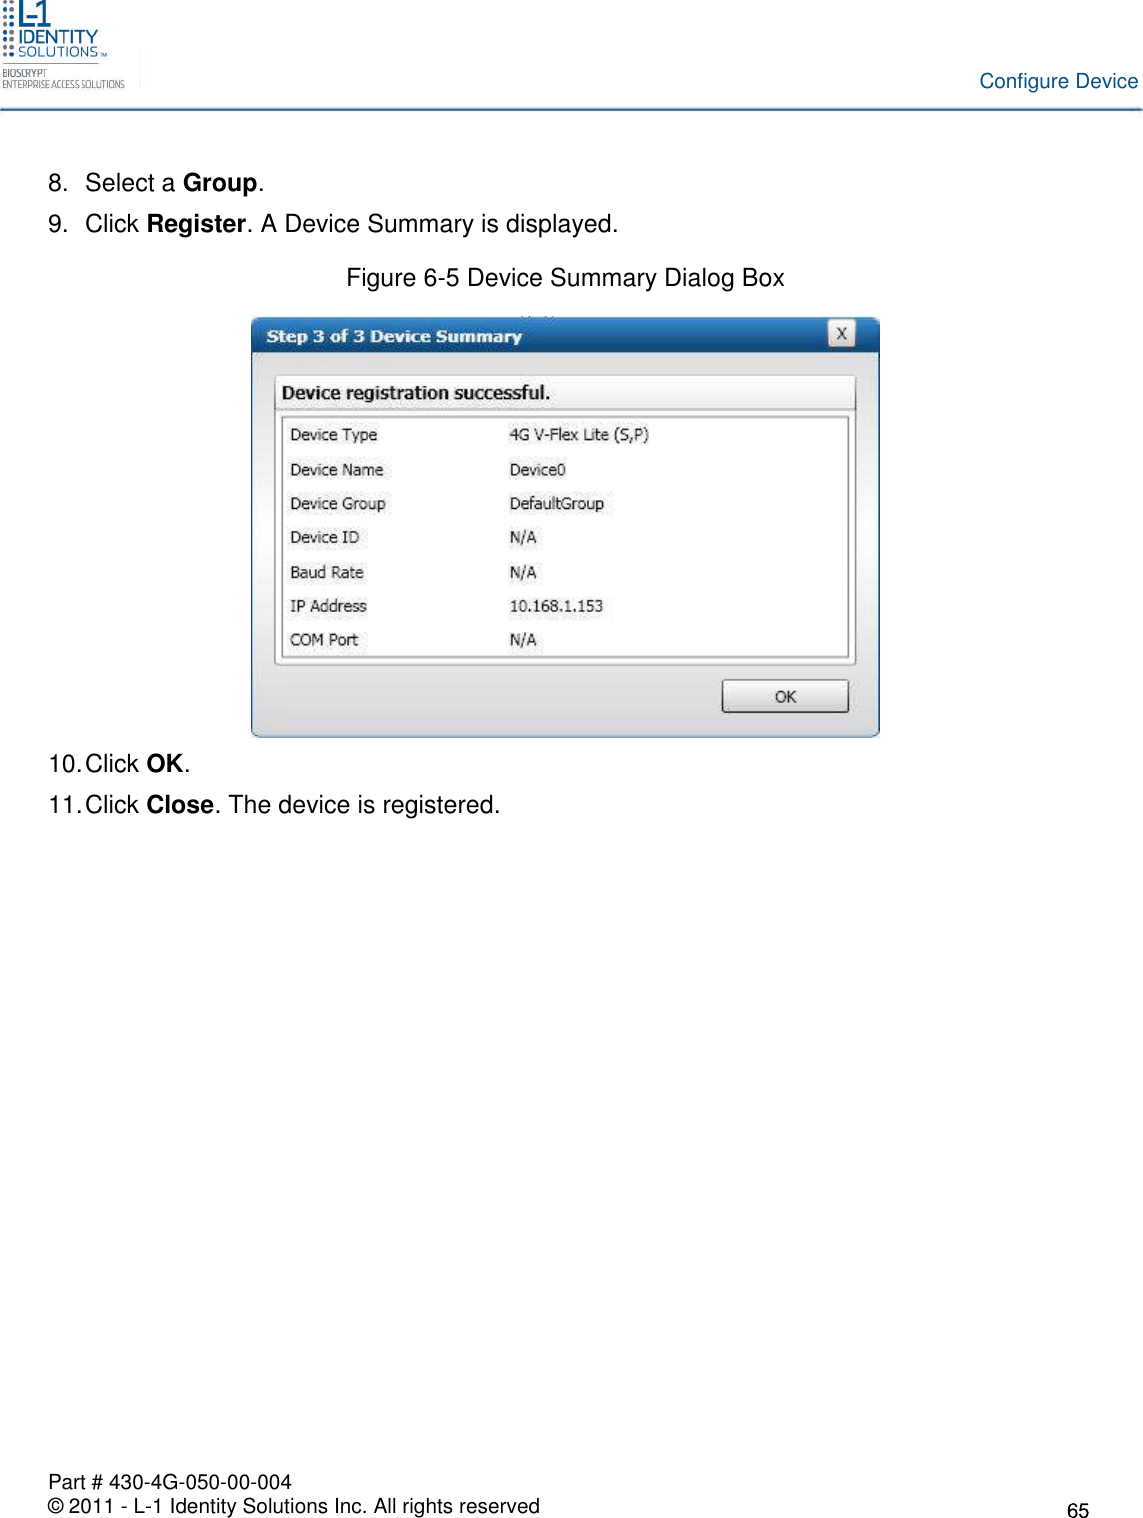 Part # 430-4G-050-00-004© 2011 - L-1 Identity Solutions Inc. All rights reservedConfigure Device8. Select a Group.9. Click Register. A Device Summary is displayed.Figure 6-5 Device Summary Dialog Box10.Click OK.11.Click Close. The device is registered.